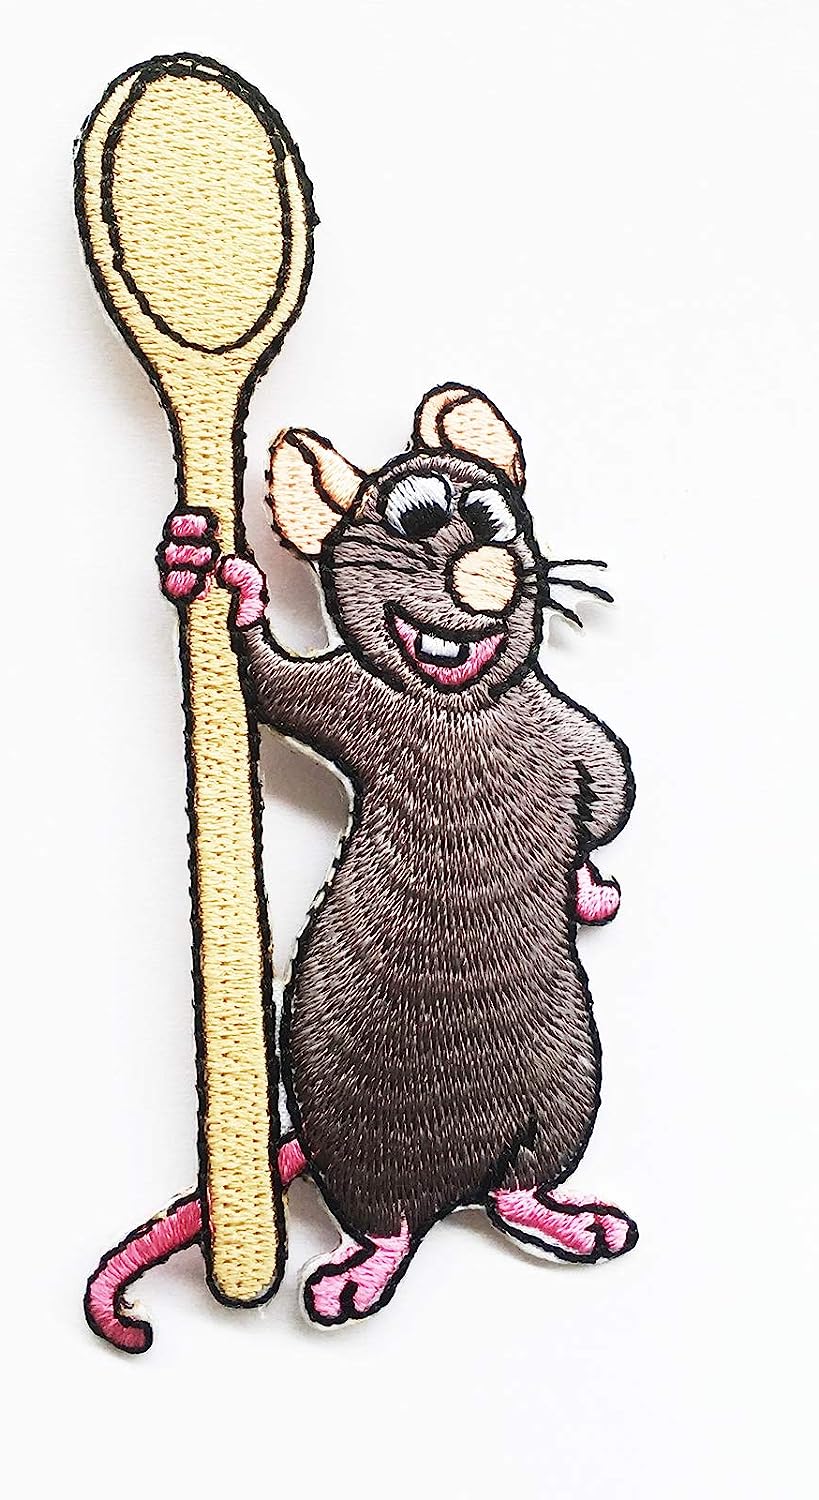 Super Hero Rat Chef Make Food Cook Cartoon a Fun Cartoon Movie Kids 1.75X3.5 in MEGADEE Patch Cartoon Kids Symbol DIY Iron on Patch Iron-On Designer Patch Used for Gifts Crafts Jeans Clothing Fabric